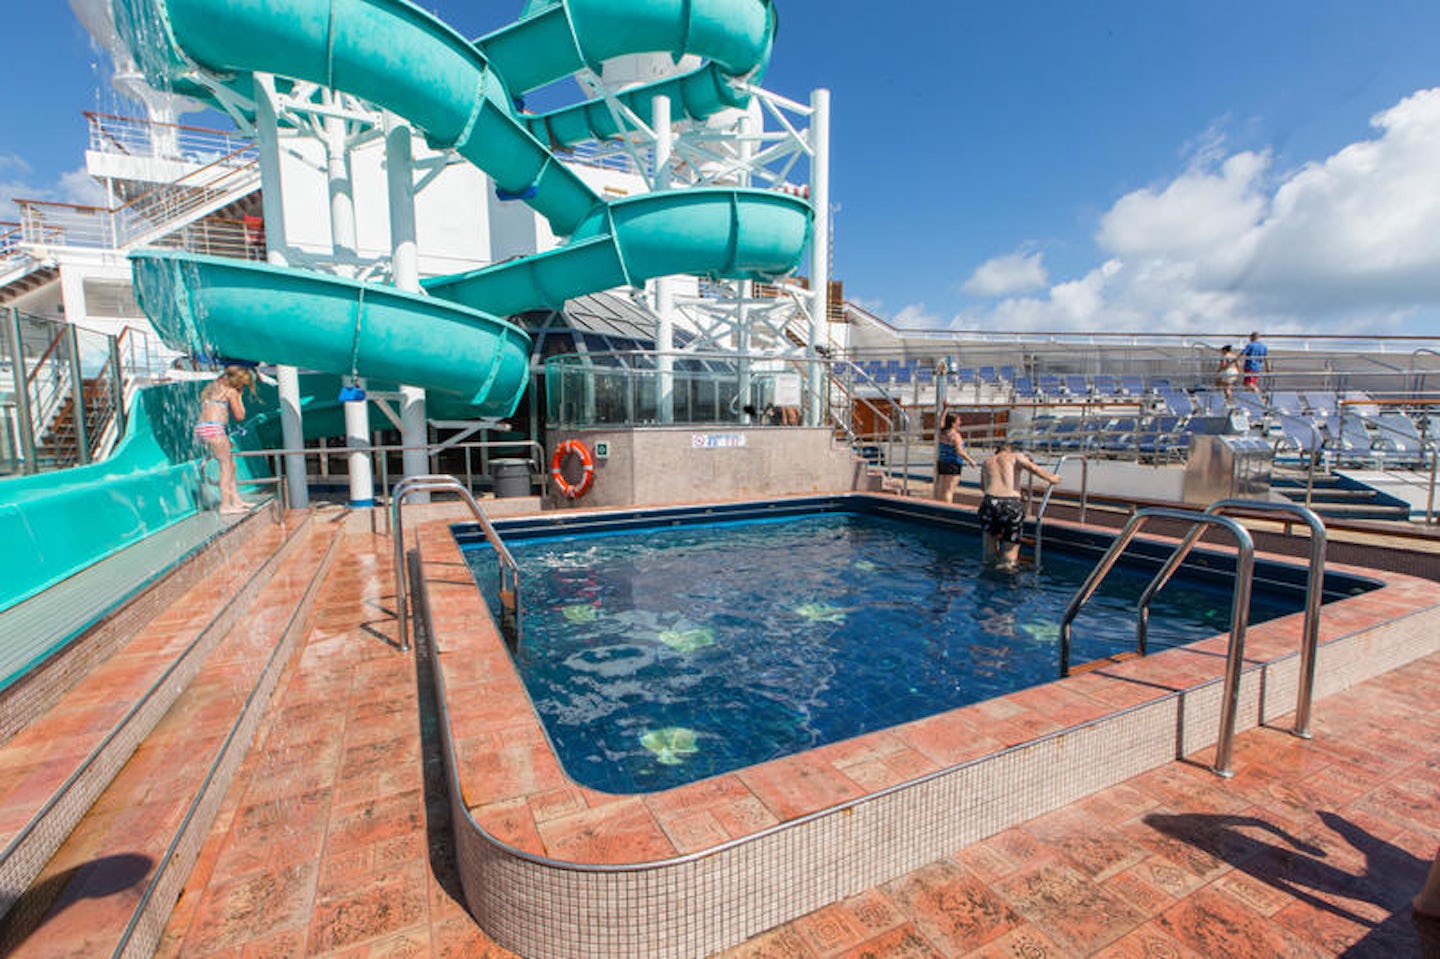 The Pools on Carnival Freedom